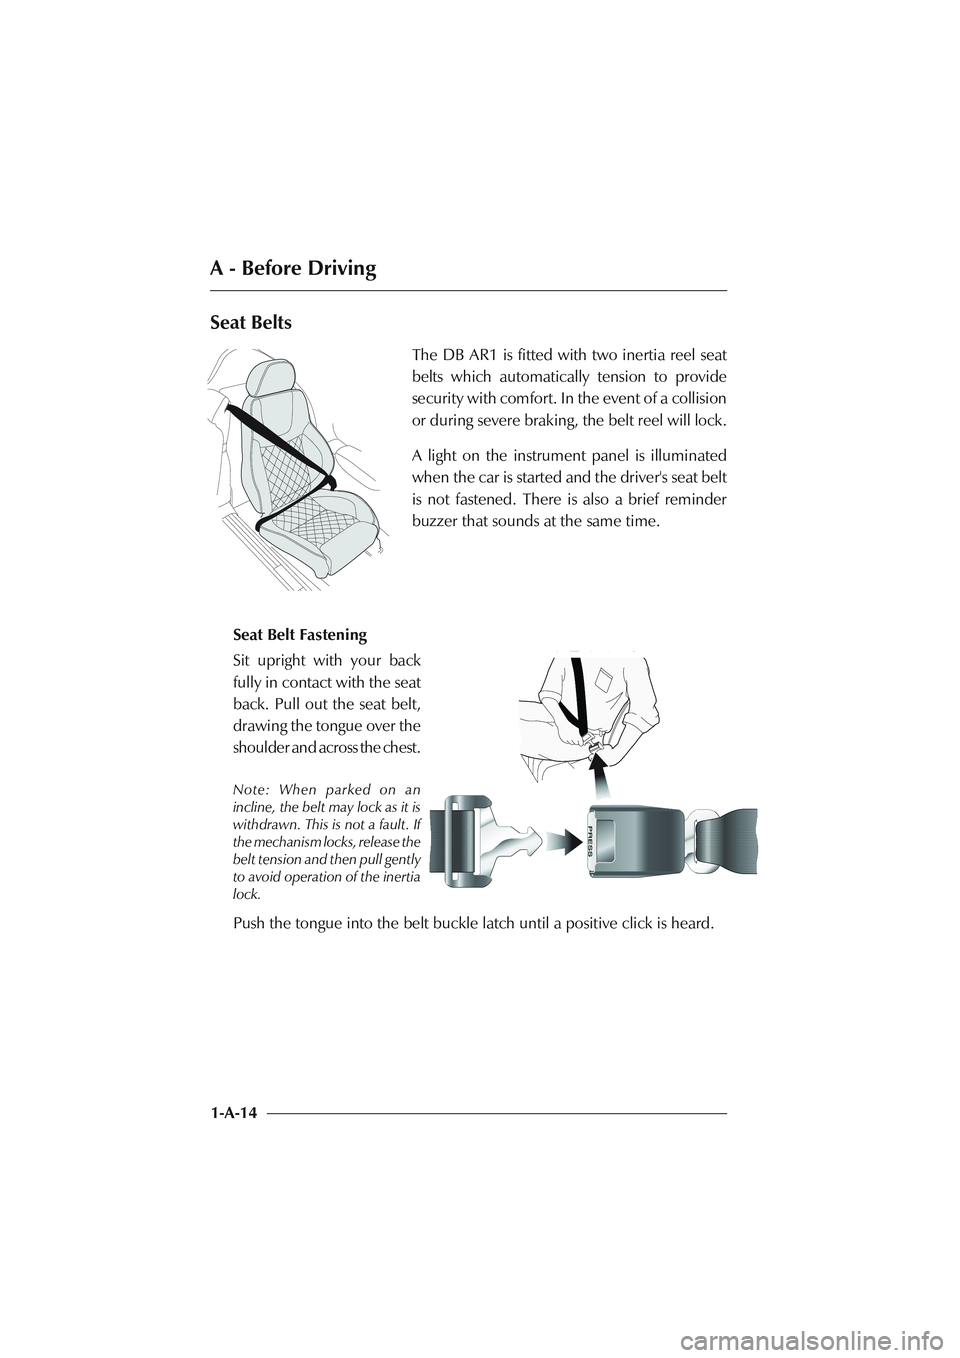 ASTON MARTIN DB AR1 Q 2003  Owners Guide A - Before Driving
1-A-14
Seat Belts
The DB AR1 is fitted with two inertia reel seat
belts which automatically tension to provide
security with comfort. In the event of a collision
or during severe br